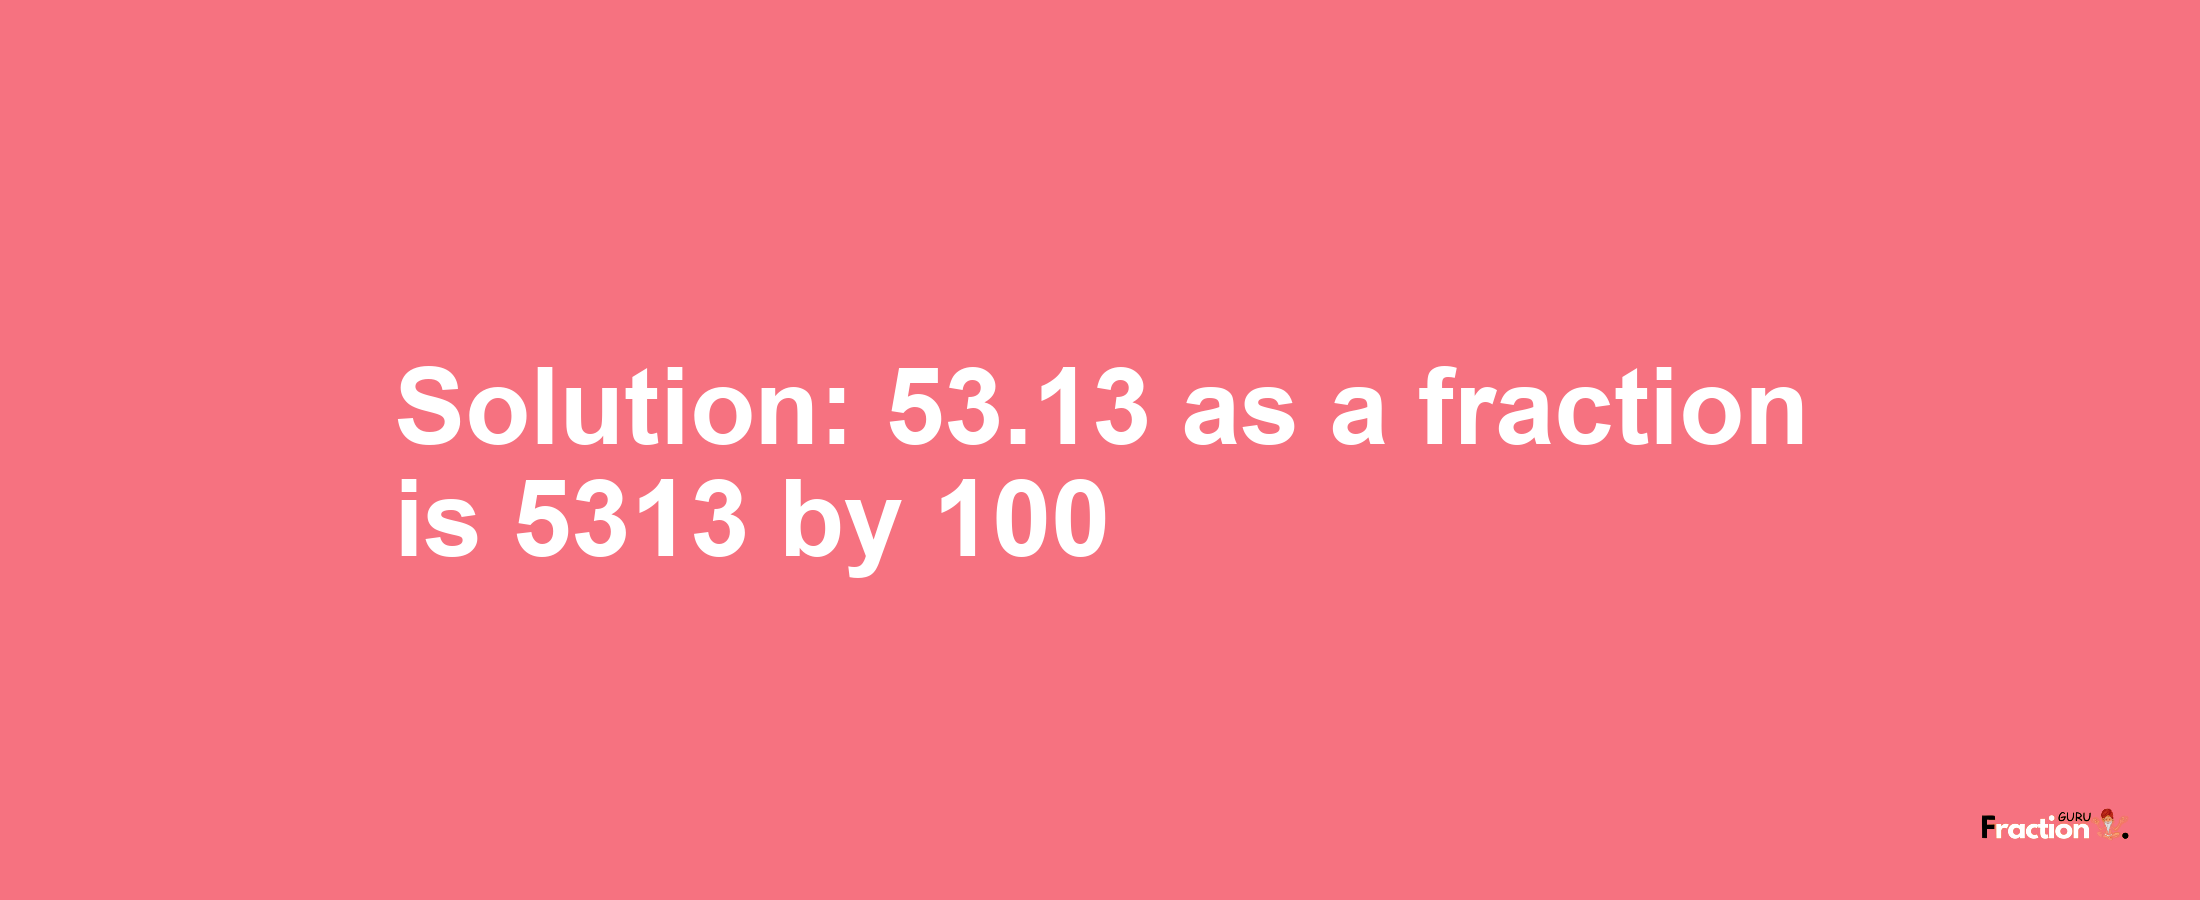 Solution:53.13 as a fraction is 5313/100